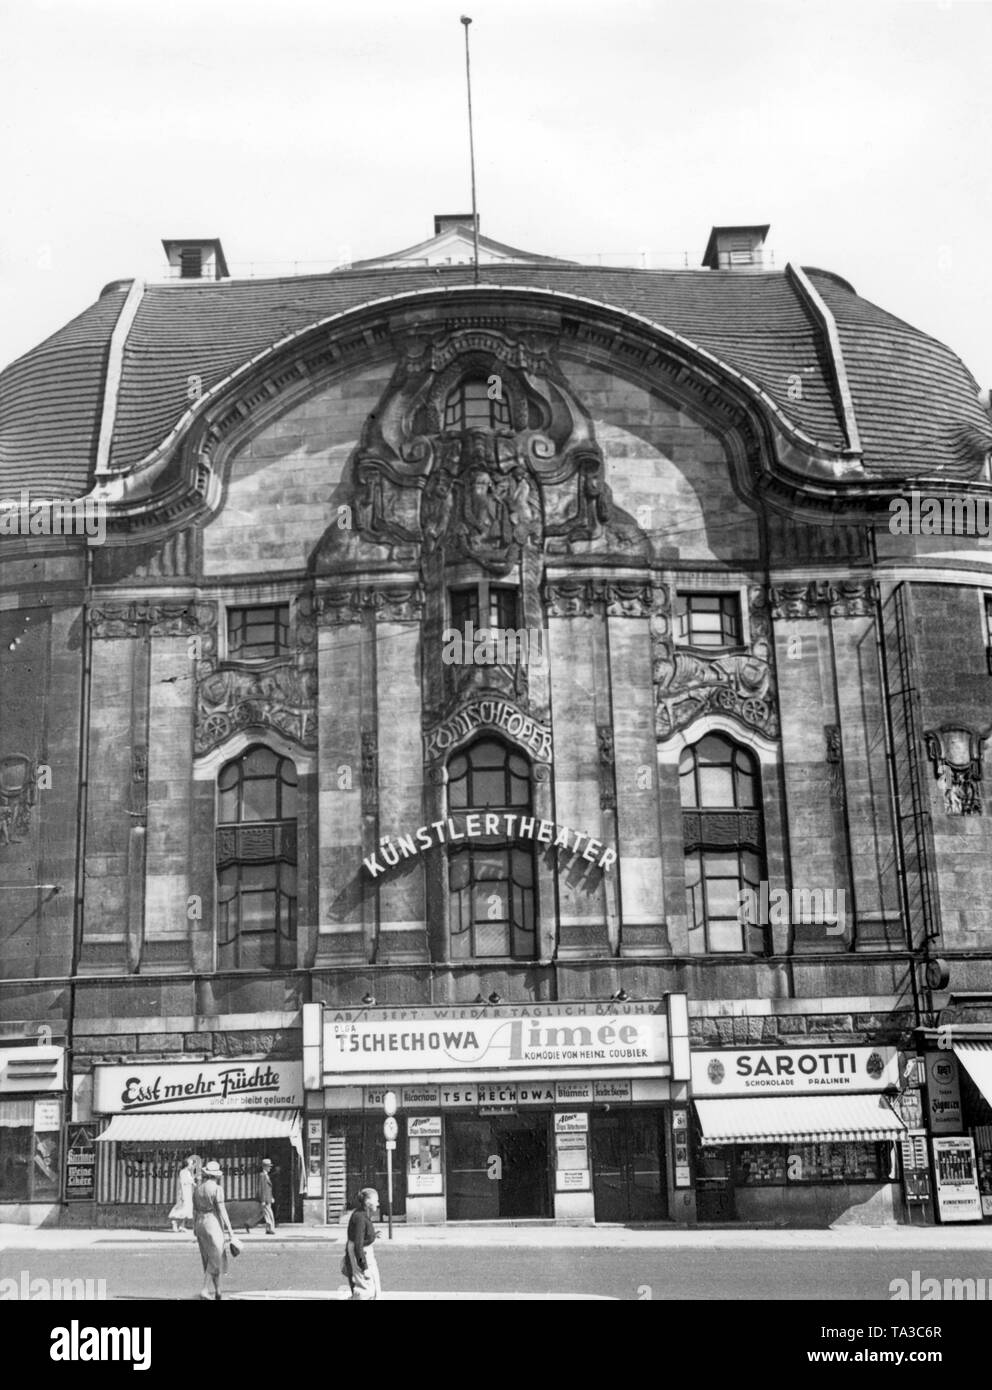 The old Komische Oper in Friedrichstrasse, at the height of the Weidendammer bridge in Berlin. The opera house was destroyed in the war and is not to be confused with the (new) Komische Oper (until 1944 Metropolitan Theater) in the Behrenstrasse. Here, an advertising of Heinz Coubier's comedy 'Aimee' (UA 1938) with Olga Chekhova in one of the leading roles. Stock Photo